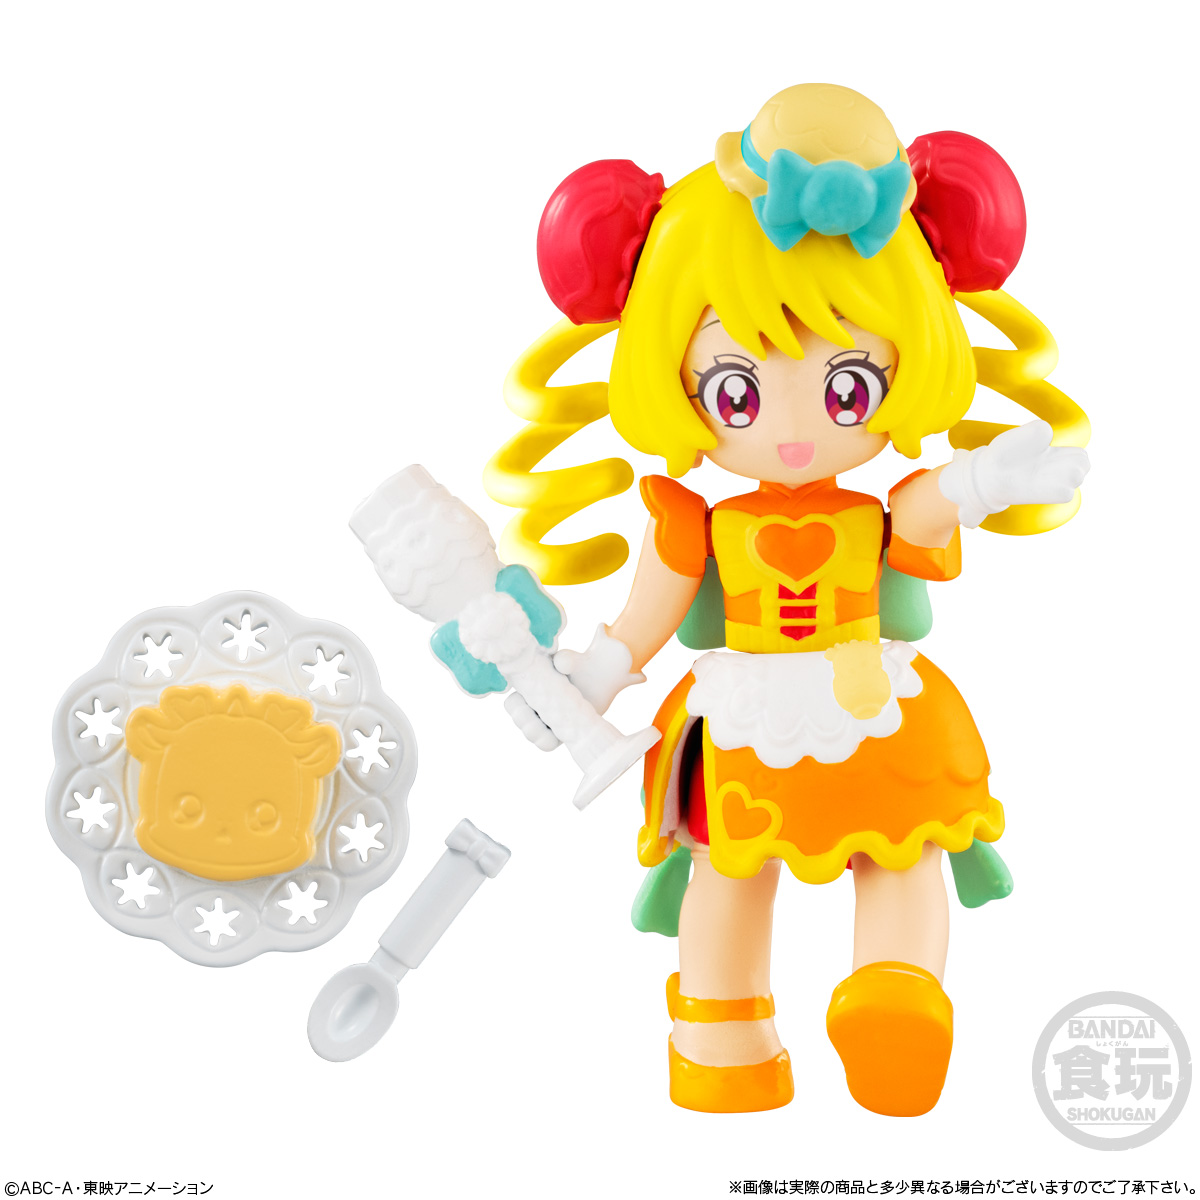 Japan anime Delicious party Precure Pretty Cure swing figure strap set of 3